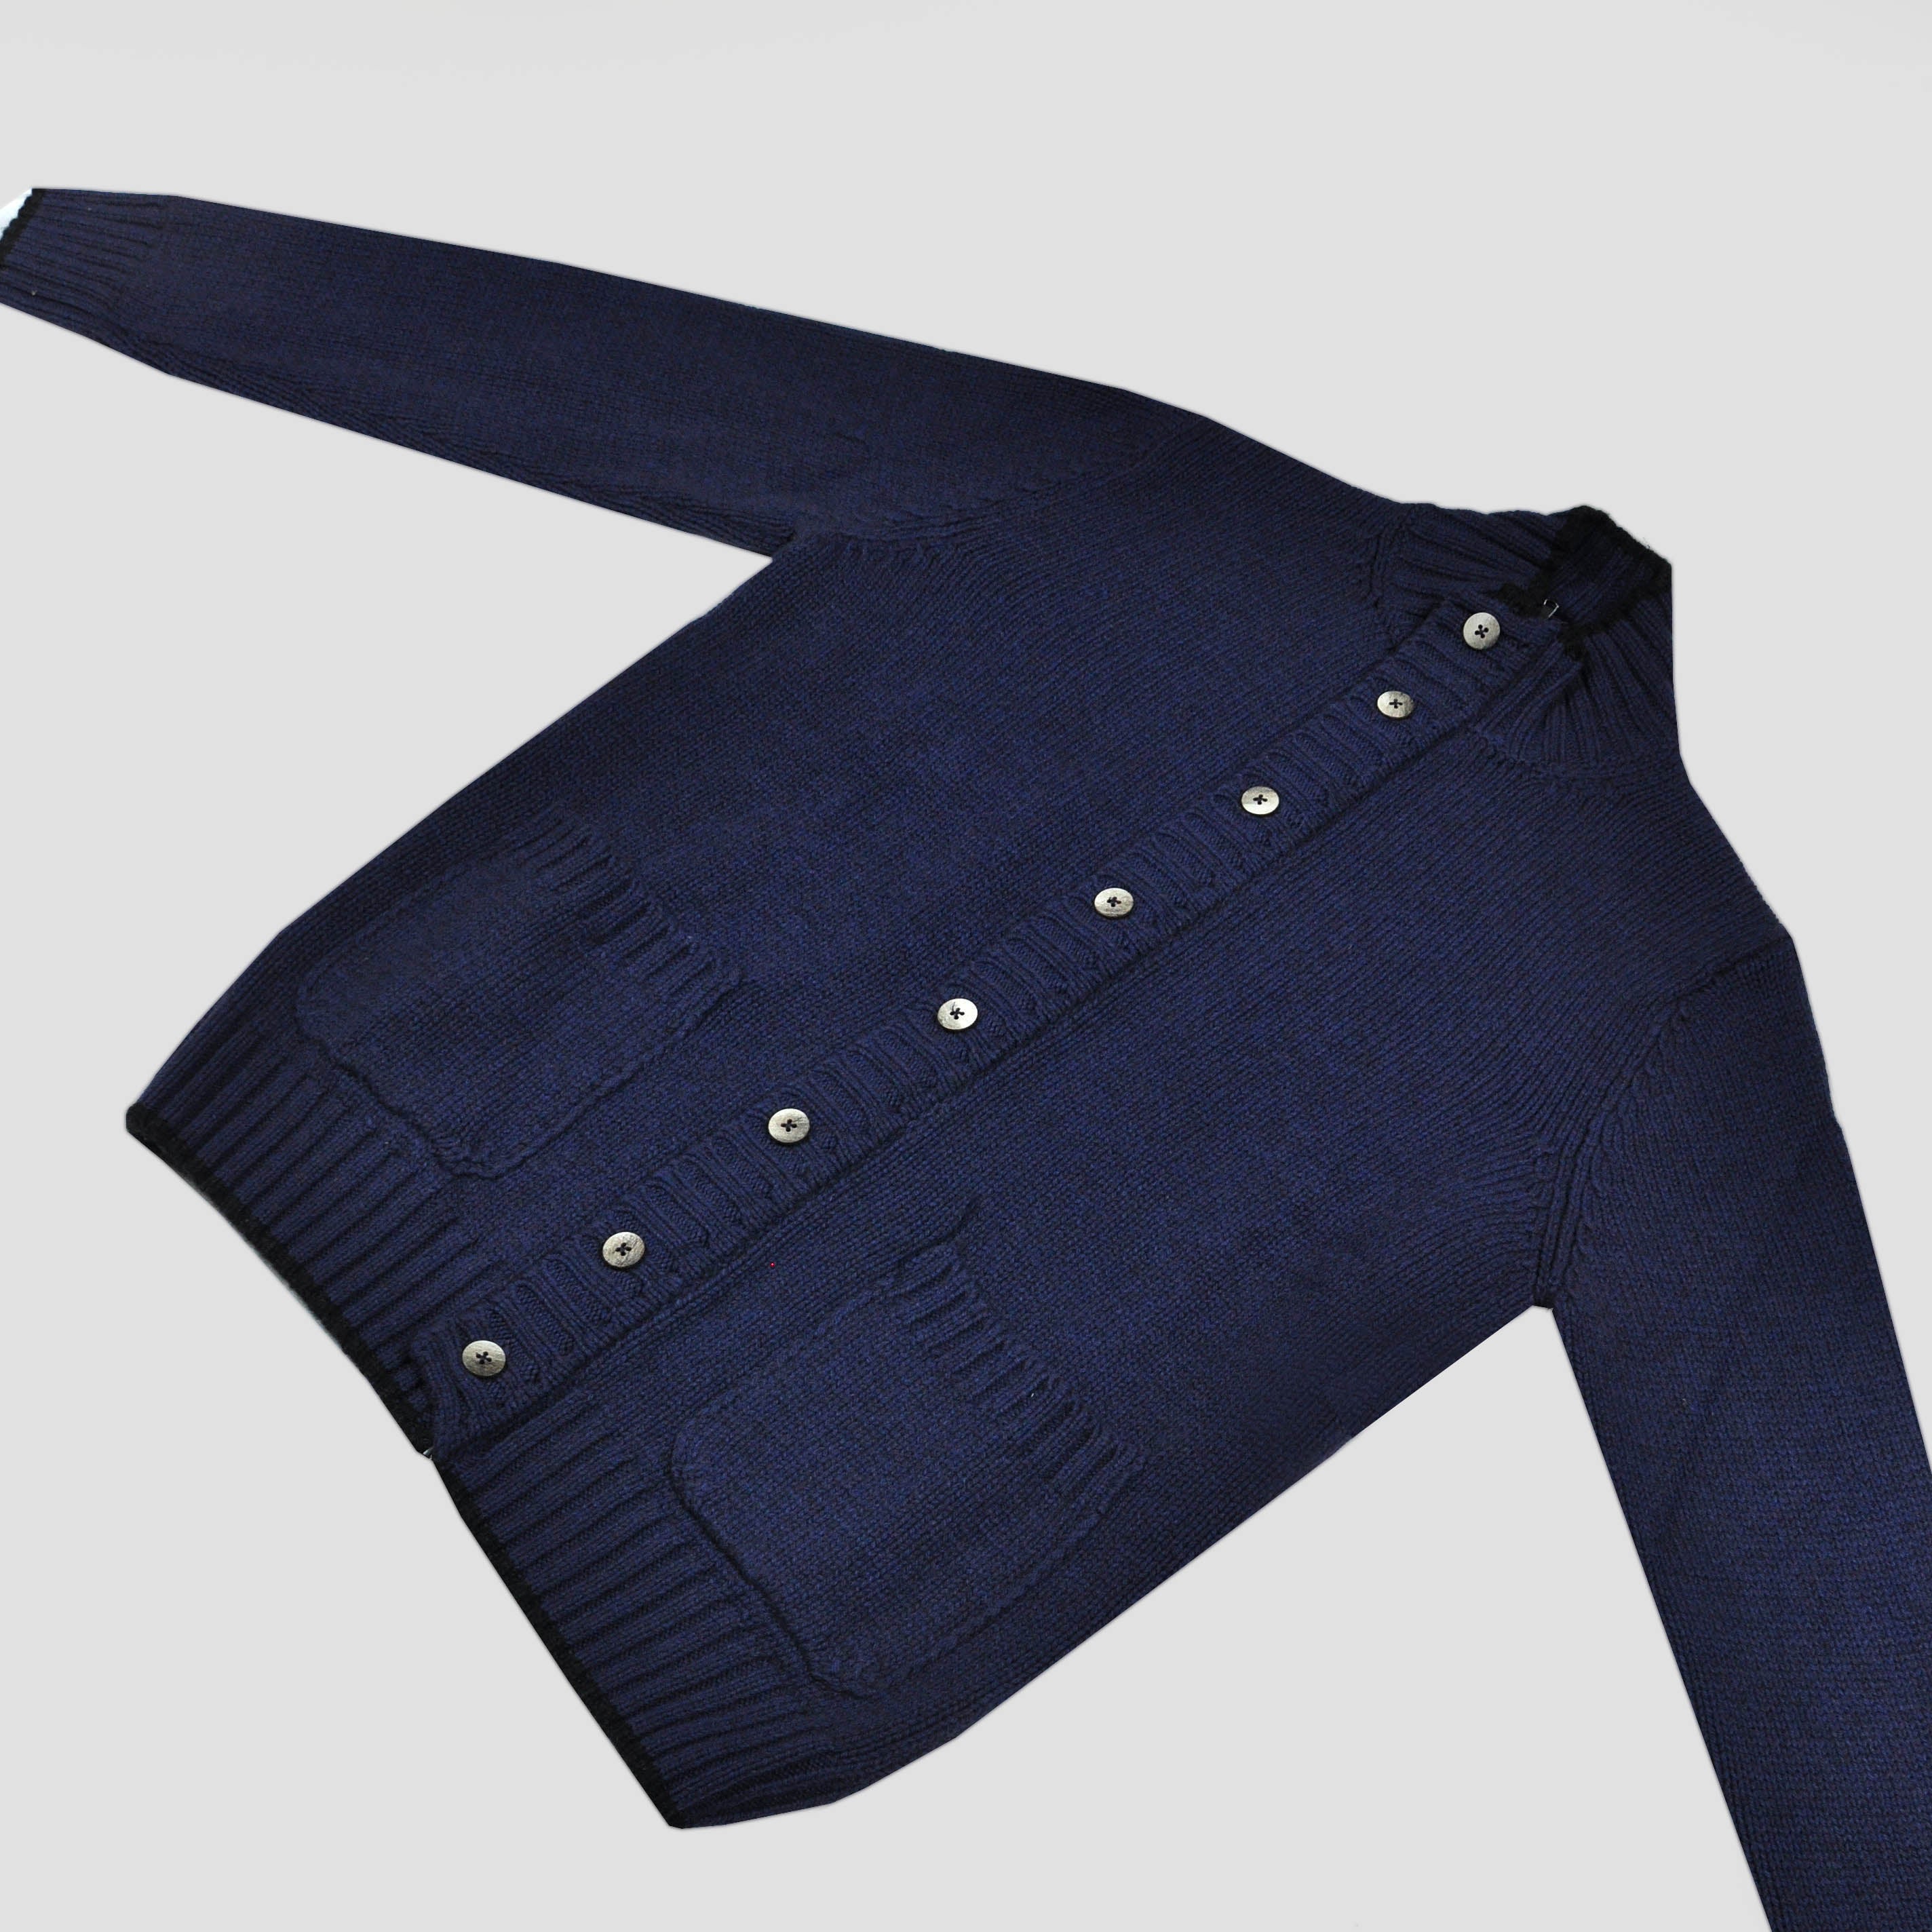 Chunky Yak's Wool Cardi in Blue with Charcoal Trim